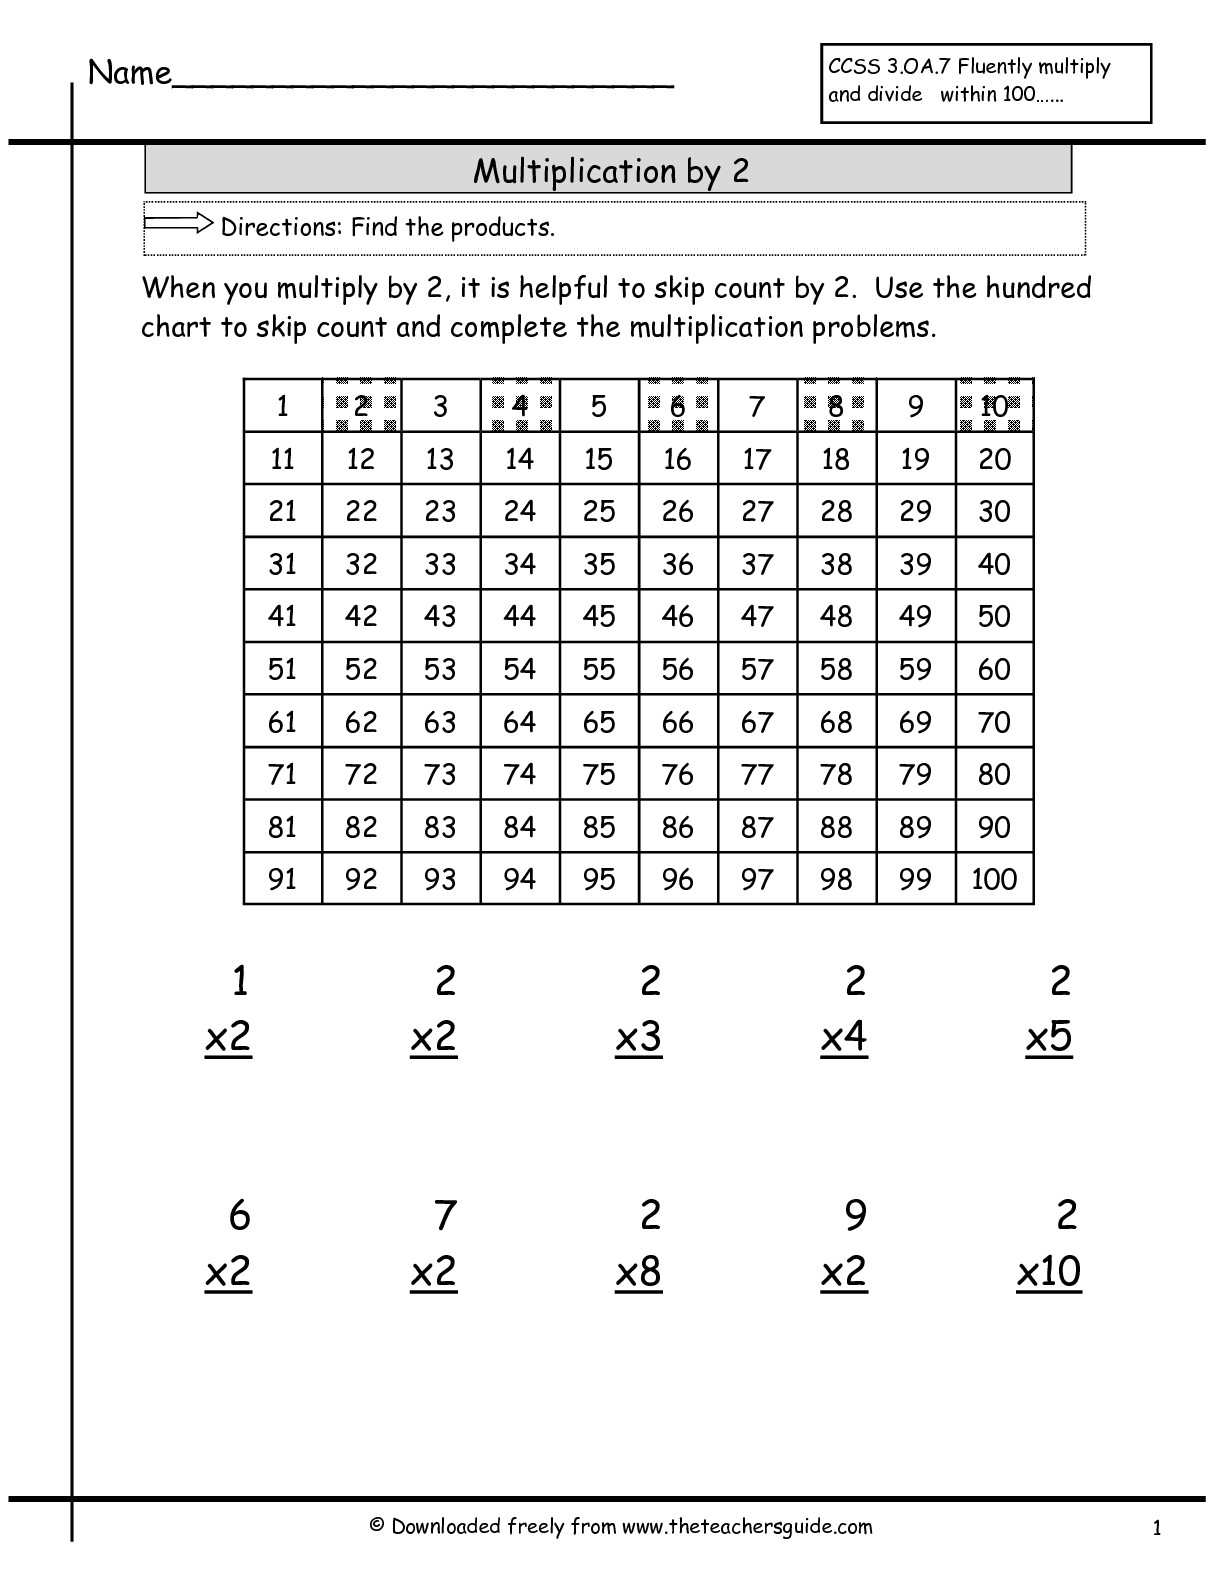 Multiplication Facts Worksheets From The Teacher&amp;#039;s Guide for Multiplication Worksheets Number Line